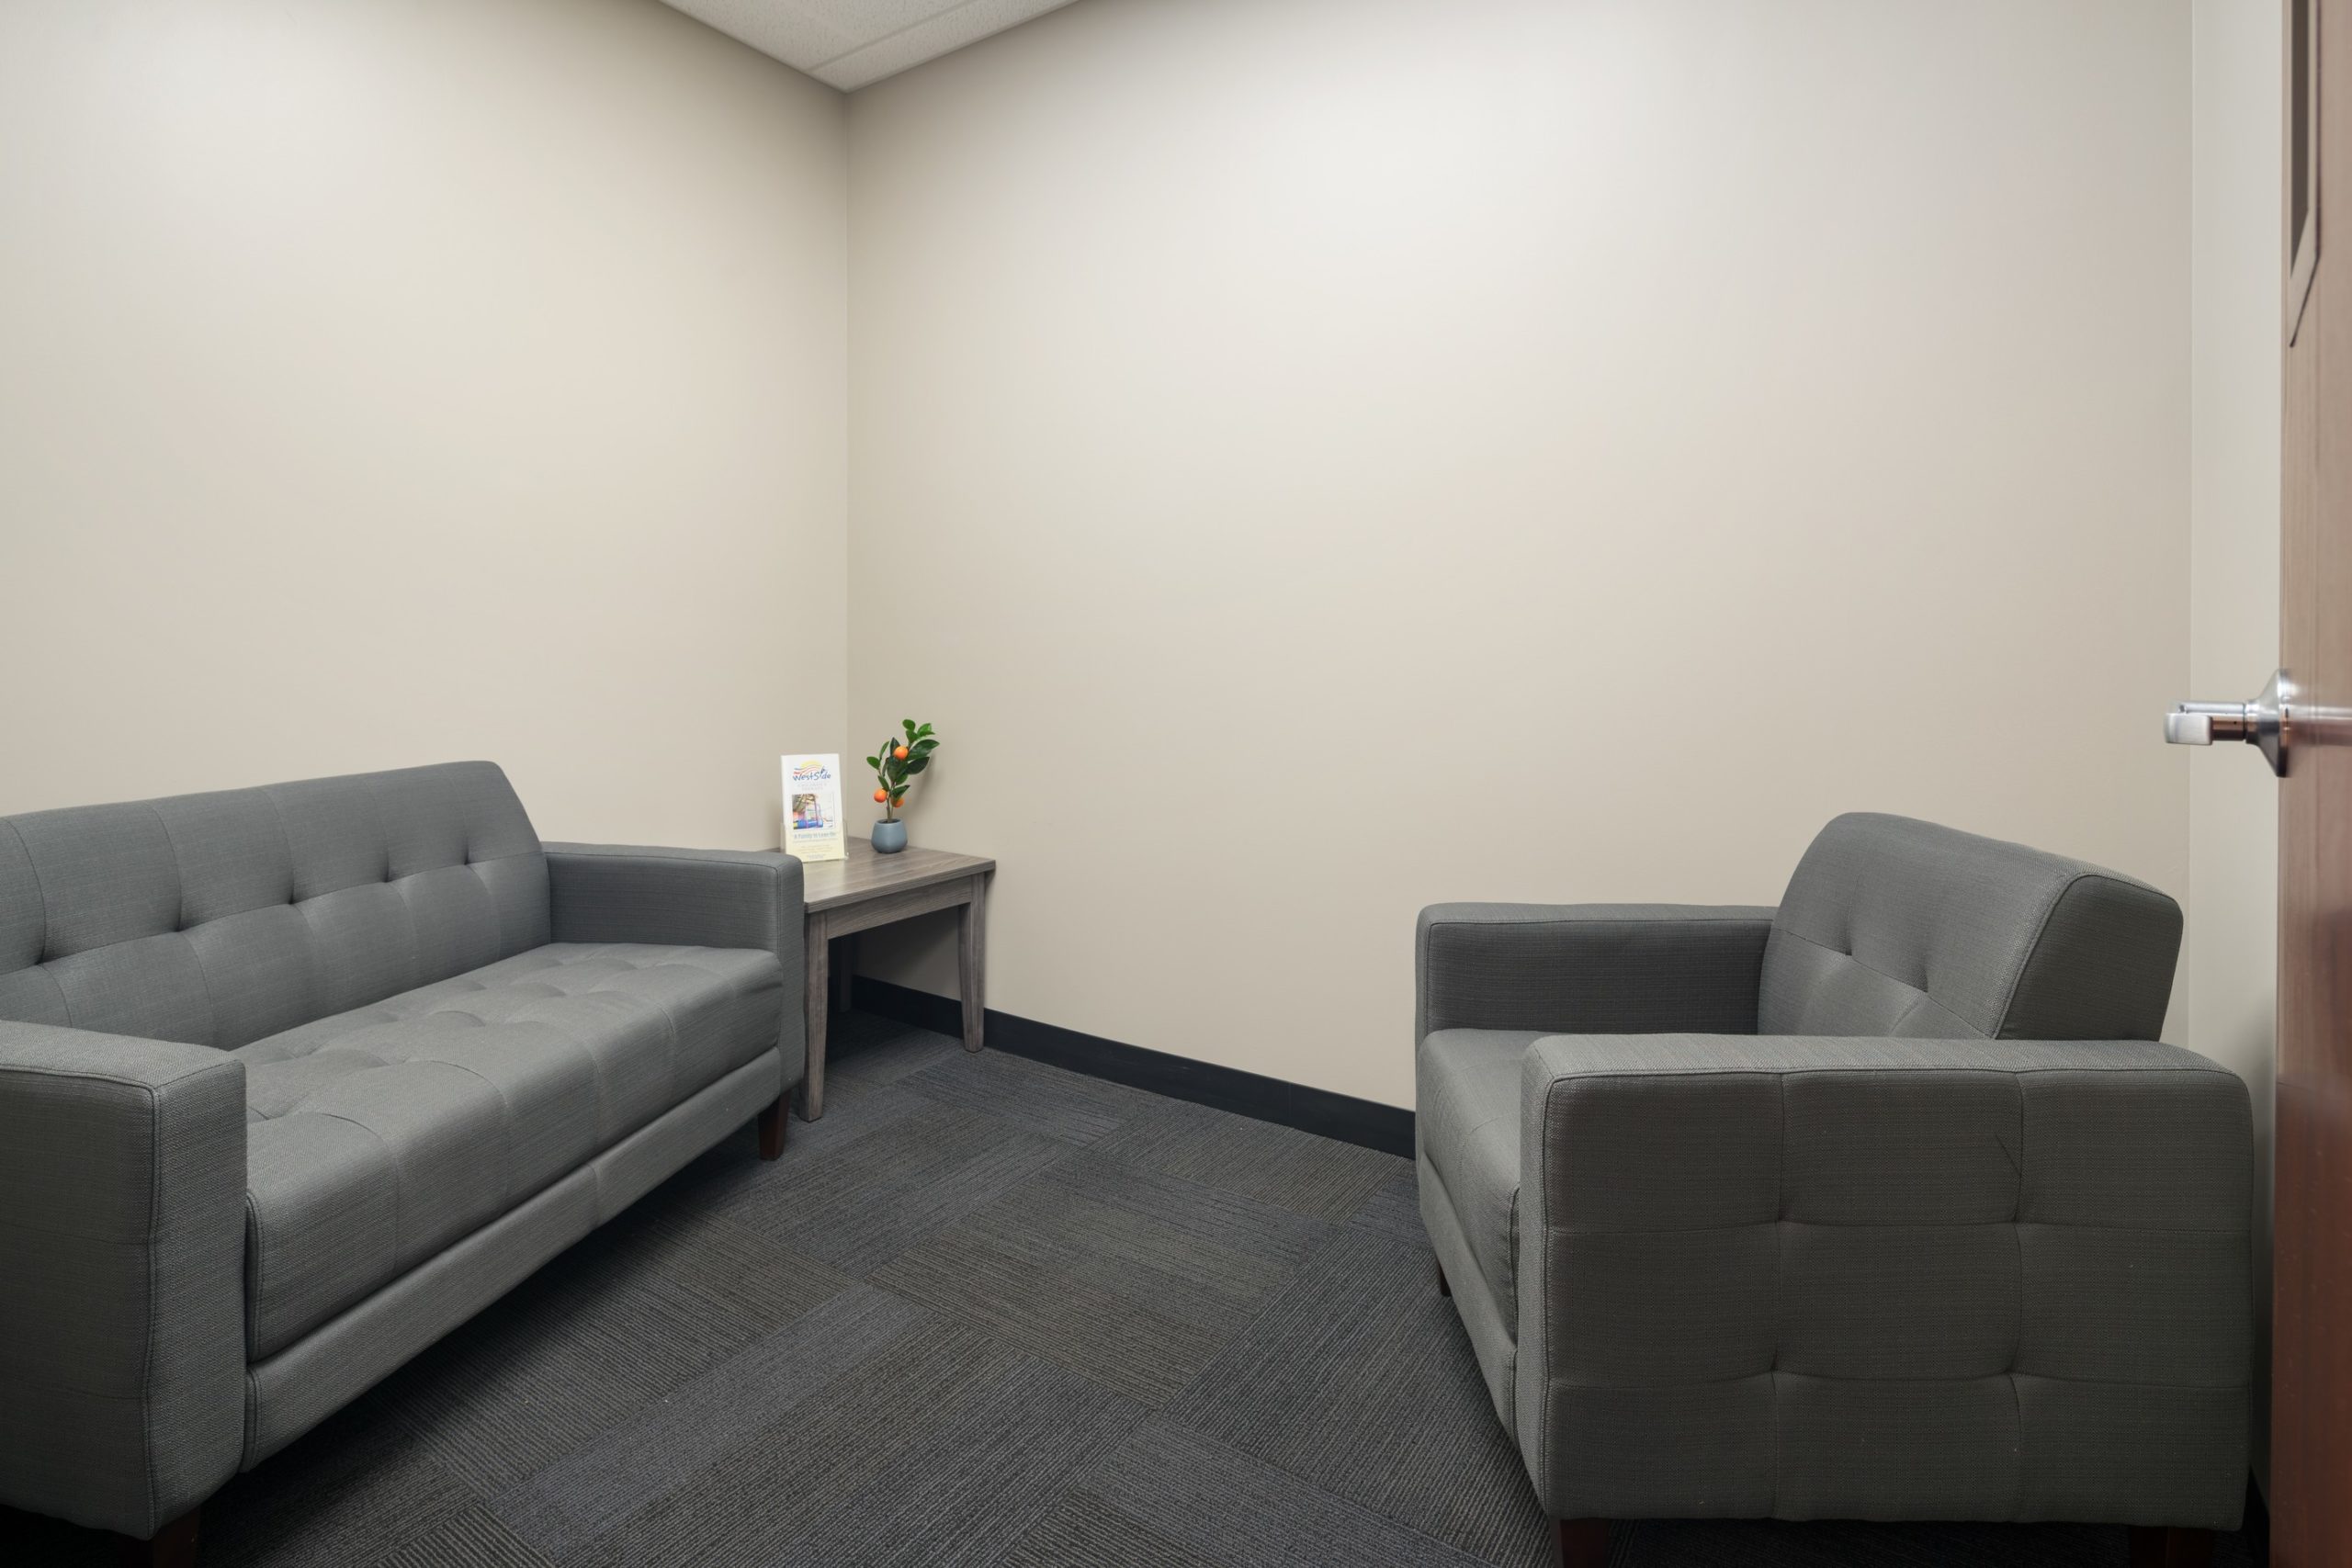 Private counseling room at Westside Children's Therapy in New Lenox Illinois clinic